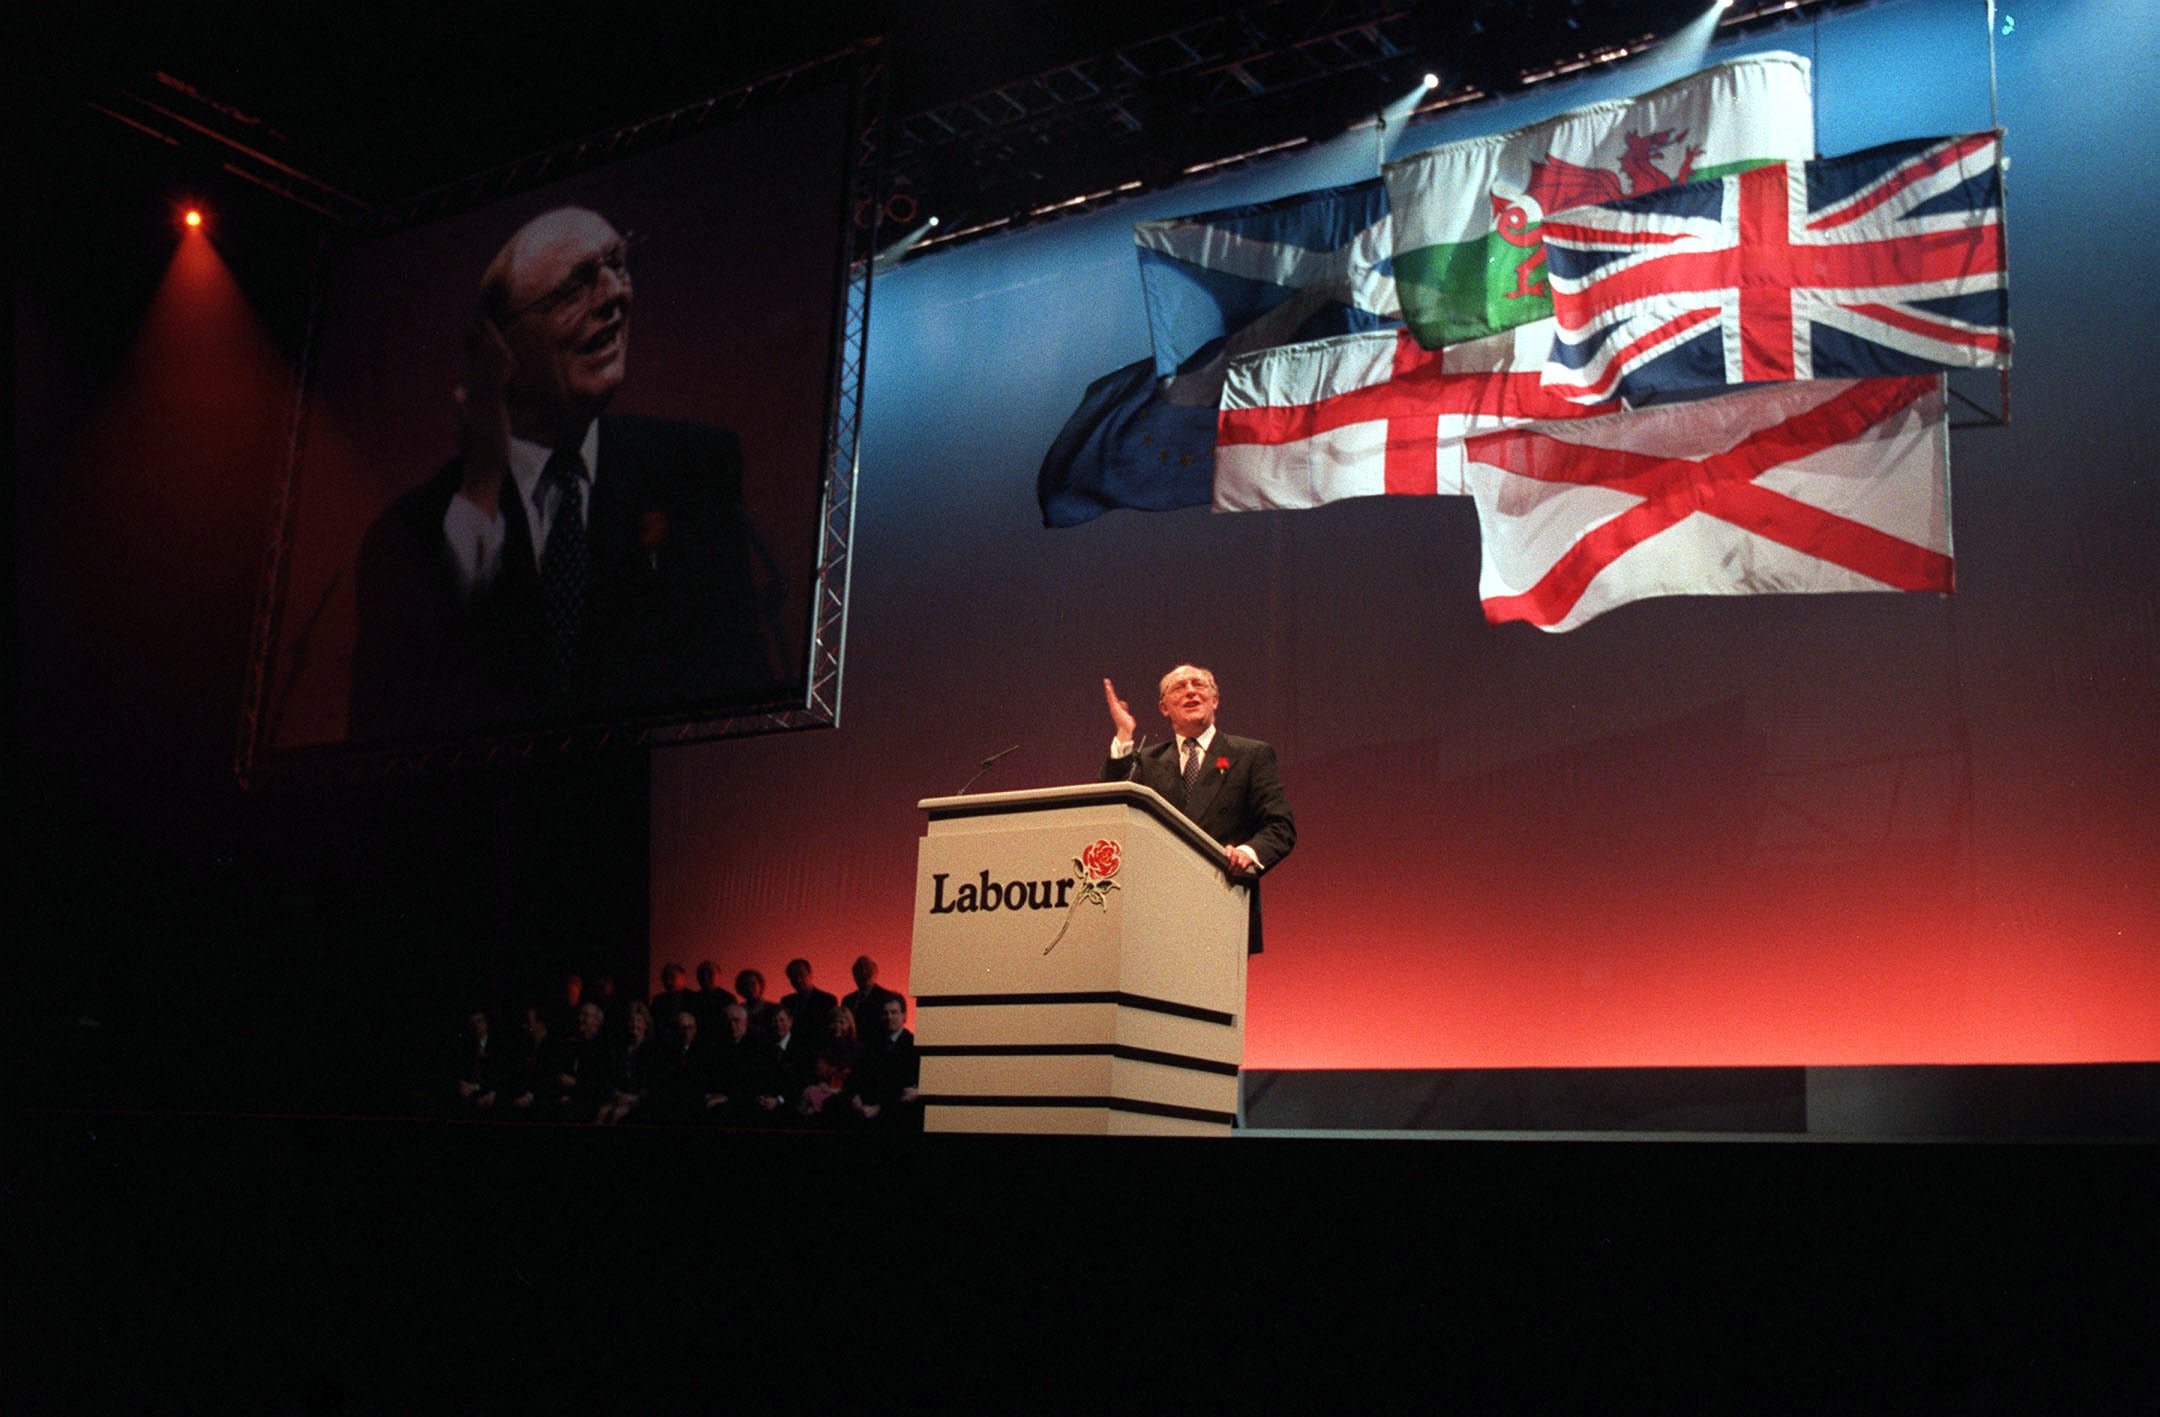 Neil Kinnock speaks at the Sheffield rally in 1992, where Labour’s triumphalism was followed by defeat at the election